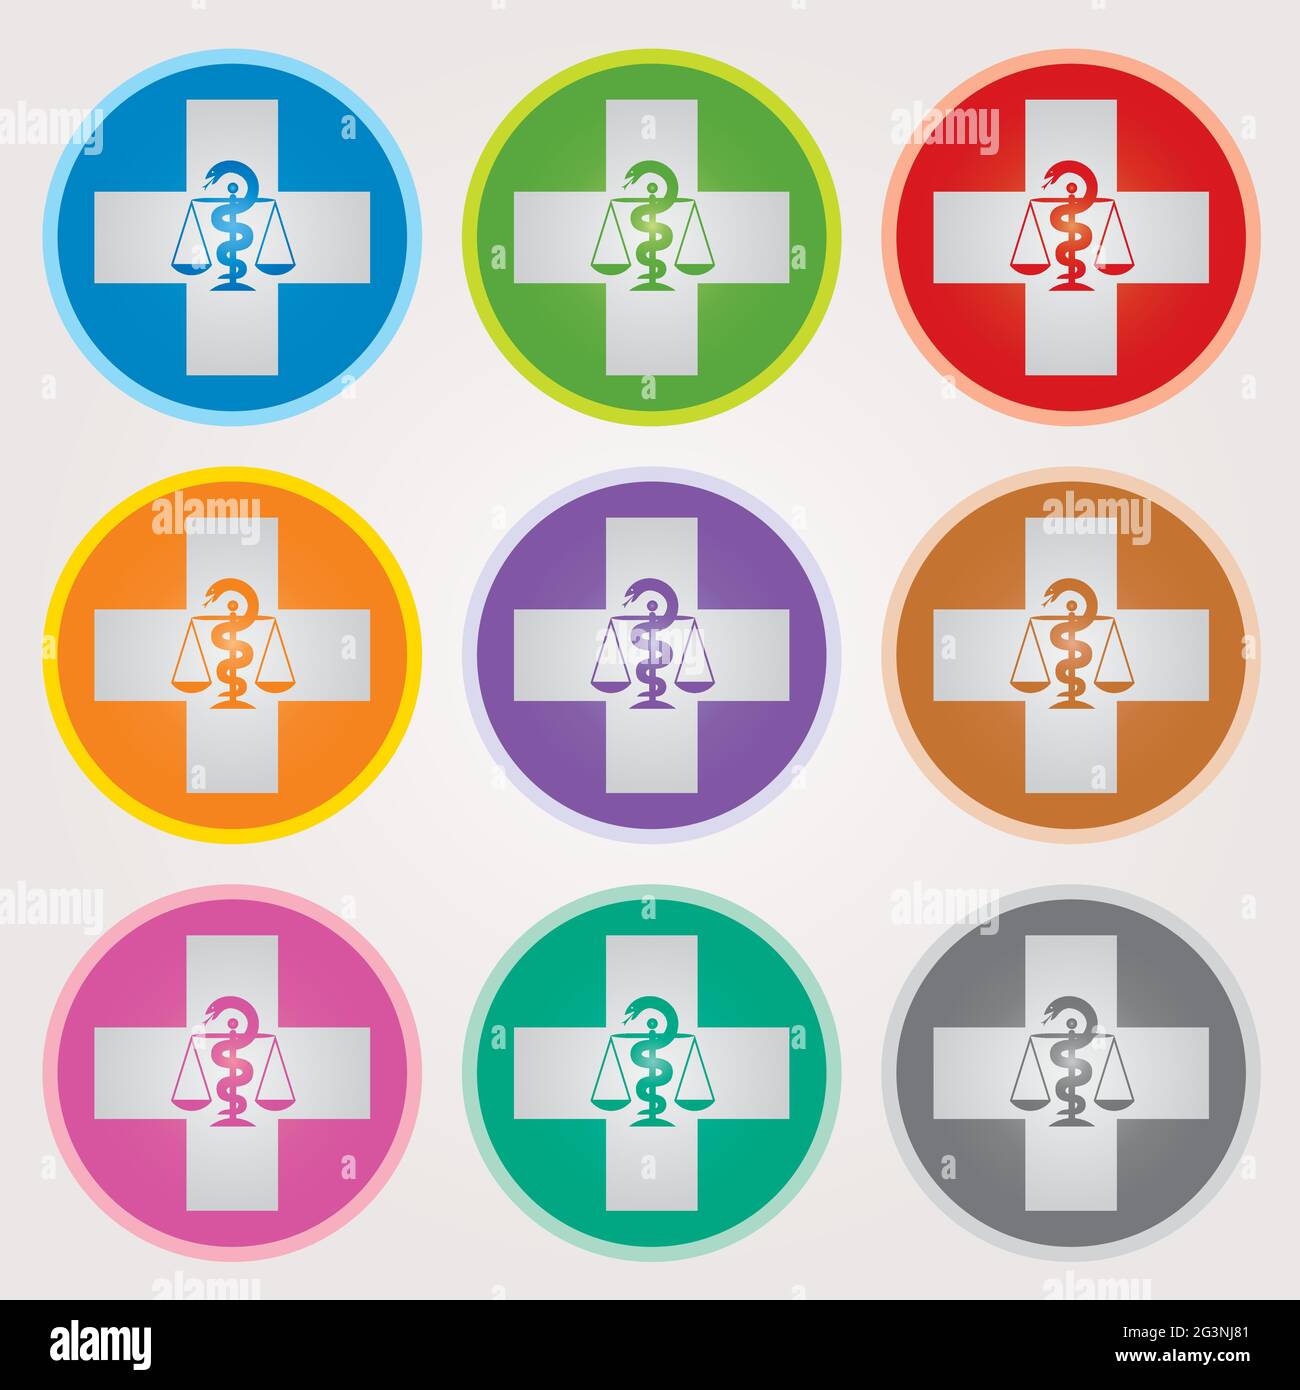 Set of Swiss Pharmacy Icons with Caduceus Symbol in Mixed Colors - Swiss Cross Symbols in Circles Stock Vector